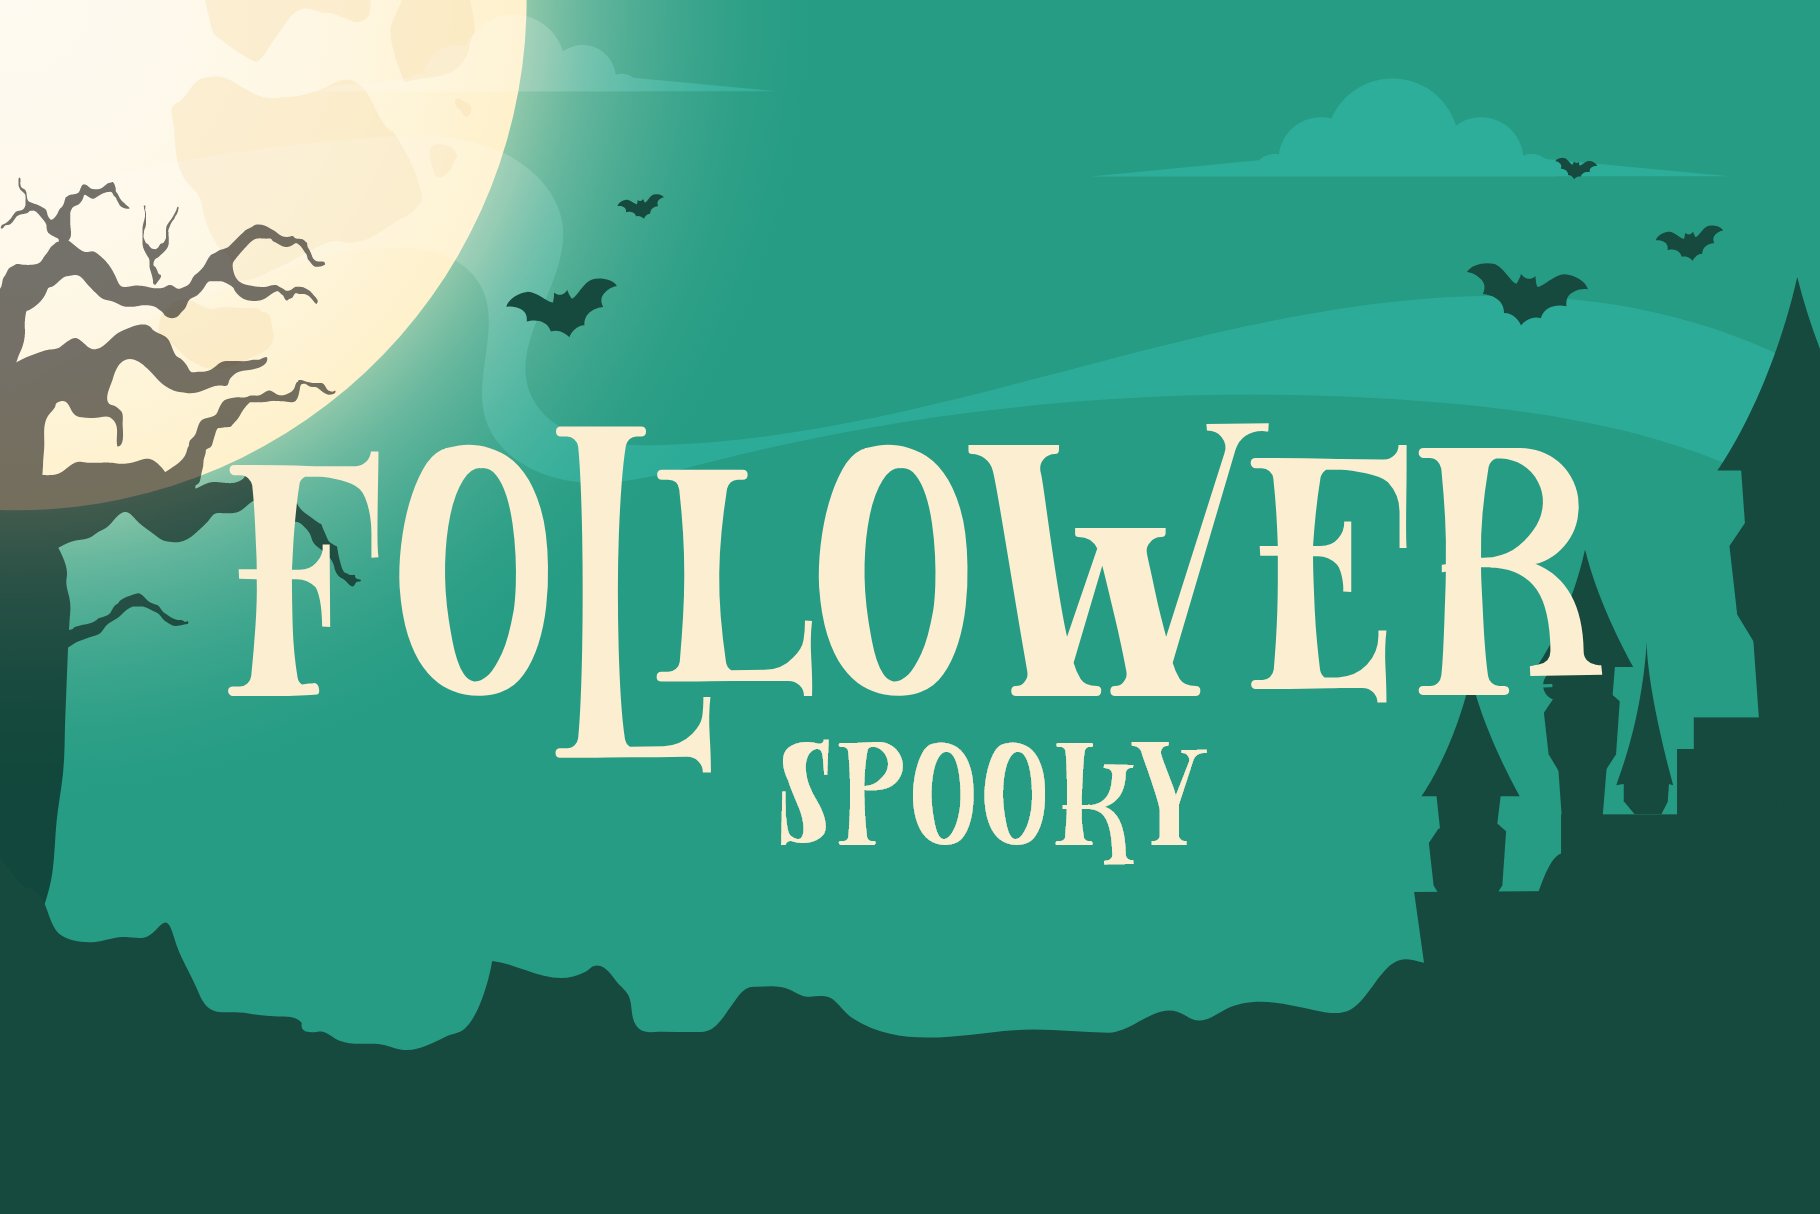 Follower Spooky halloween Font cover image.